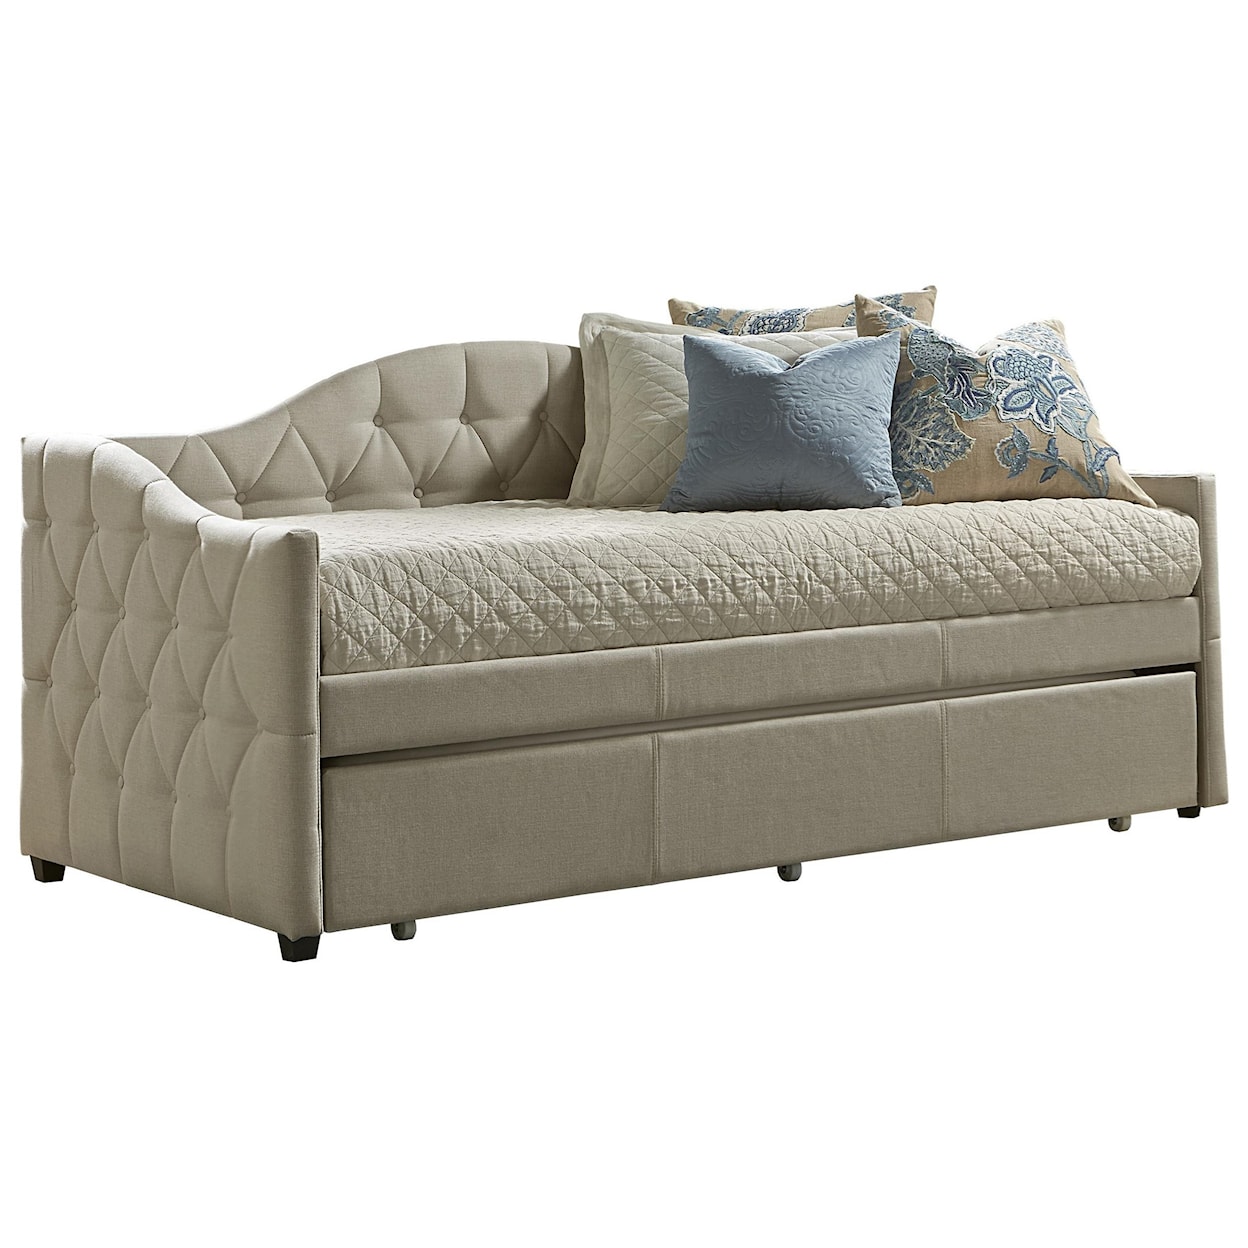 Hillsdale Daybeds Daybed with Trundle